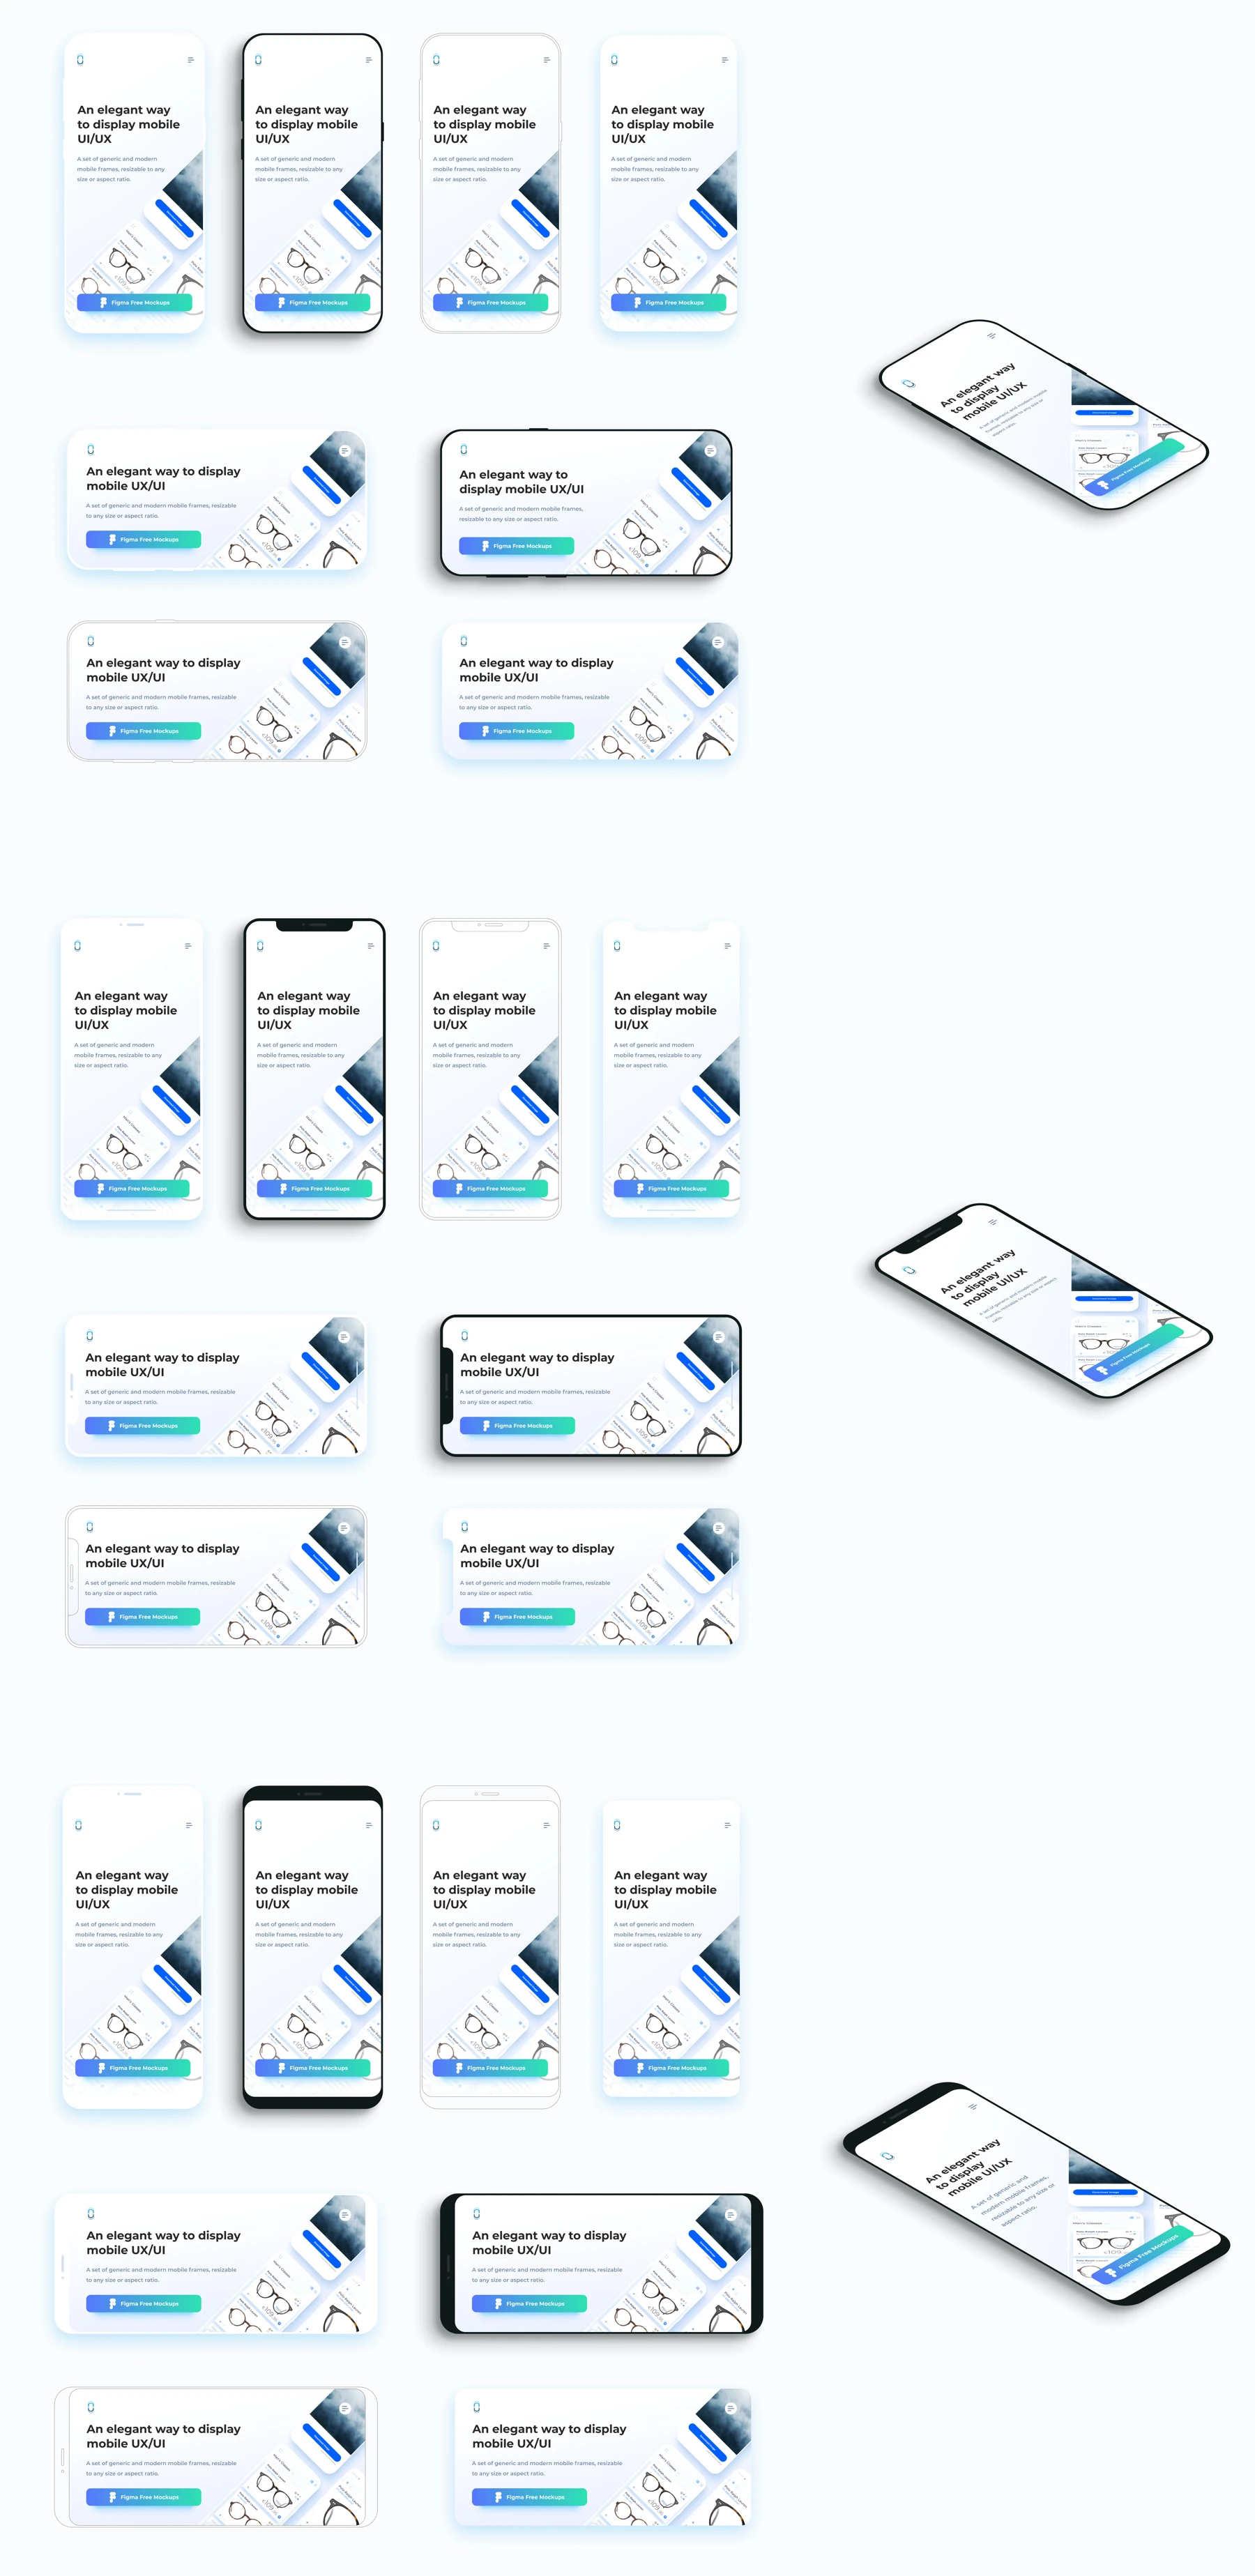 Flat Mobile Frames Mockups for Figma - Sometimes, we just need a simple, modern and pretty mobile frame to feature our app design.